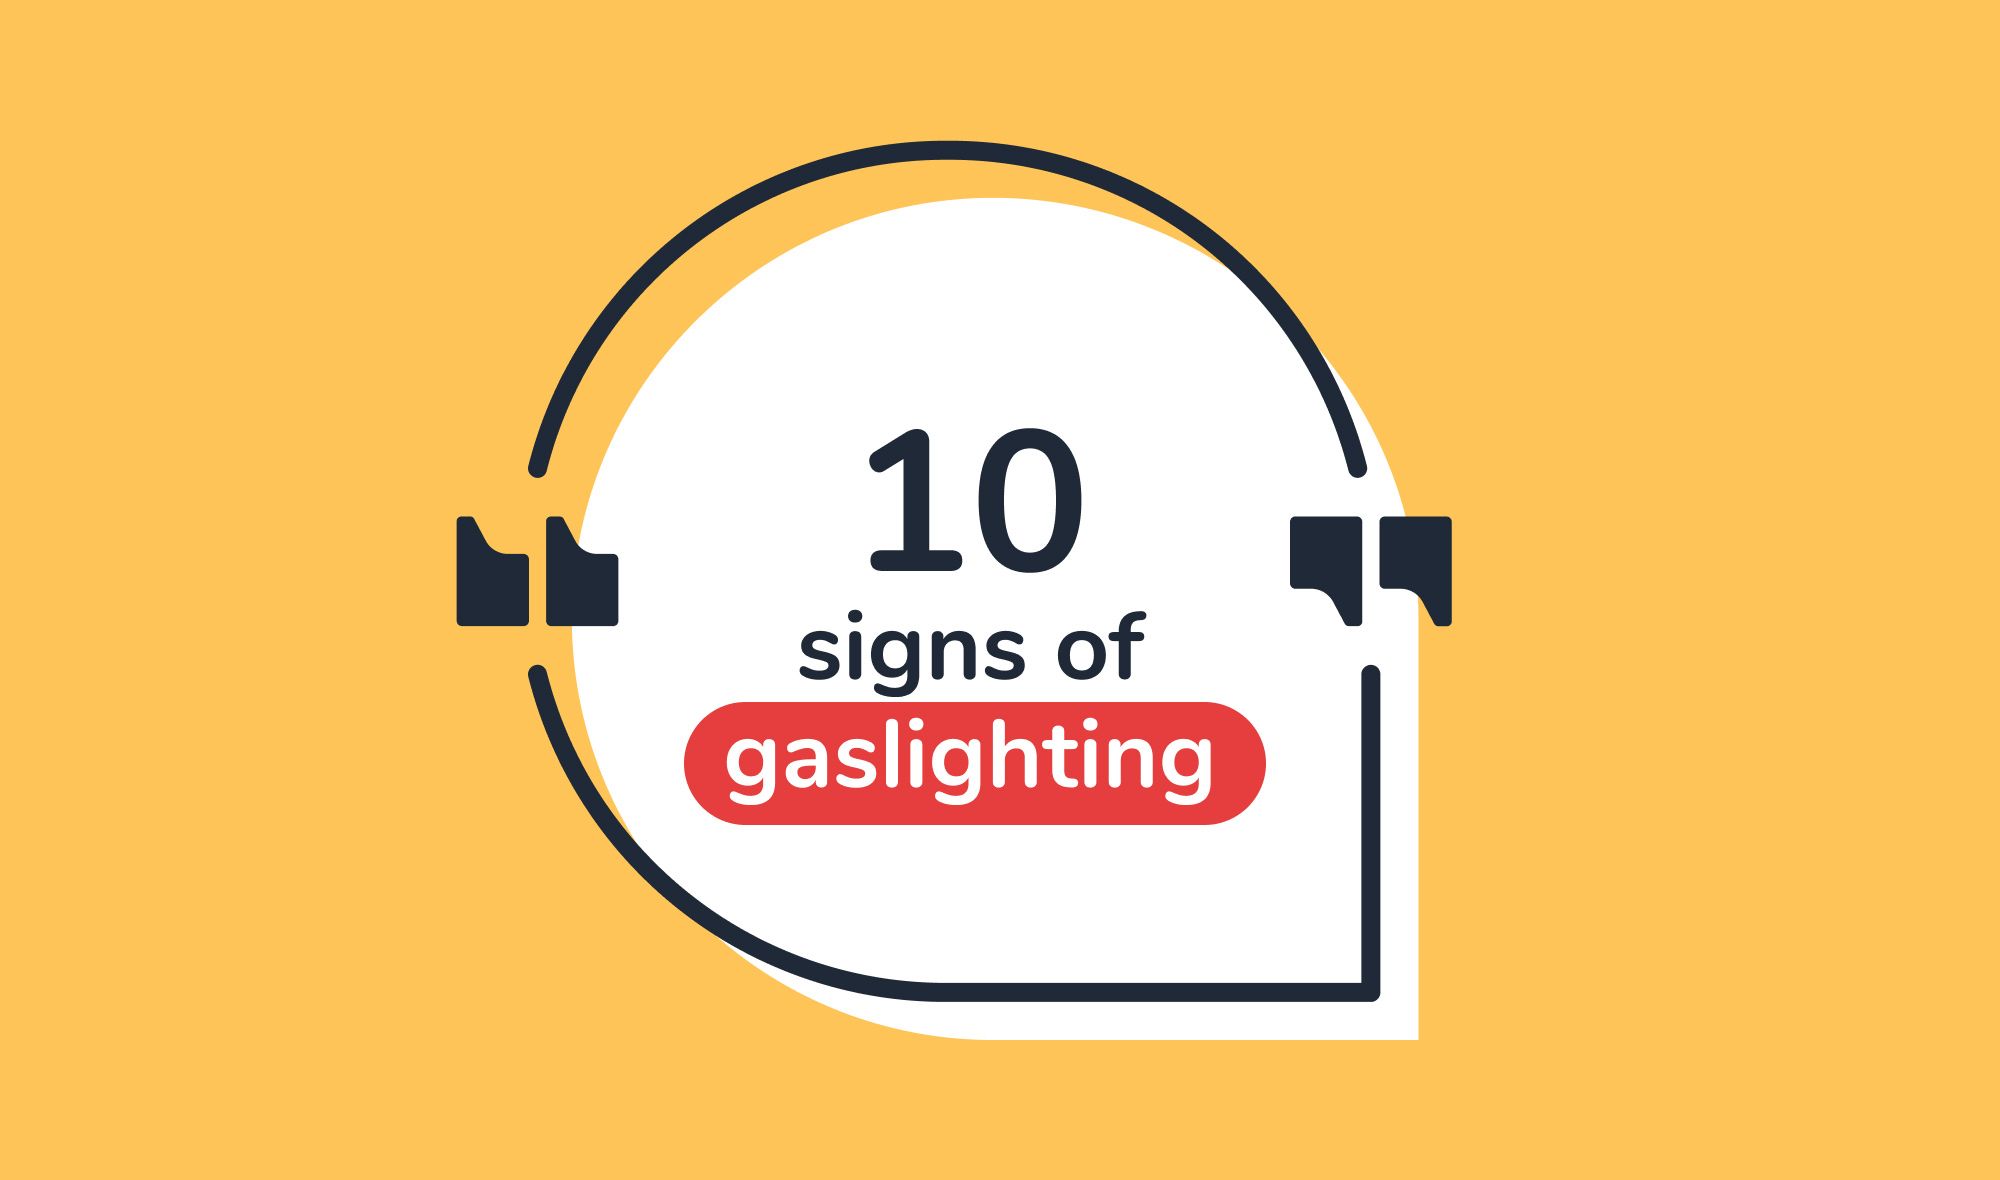 10 signs of gaslighting: how to recognize and respond to emotional abuse